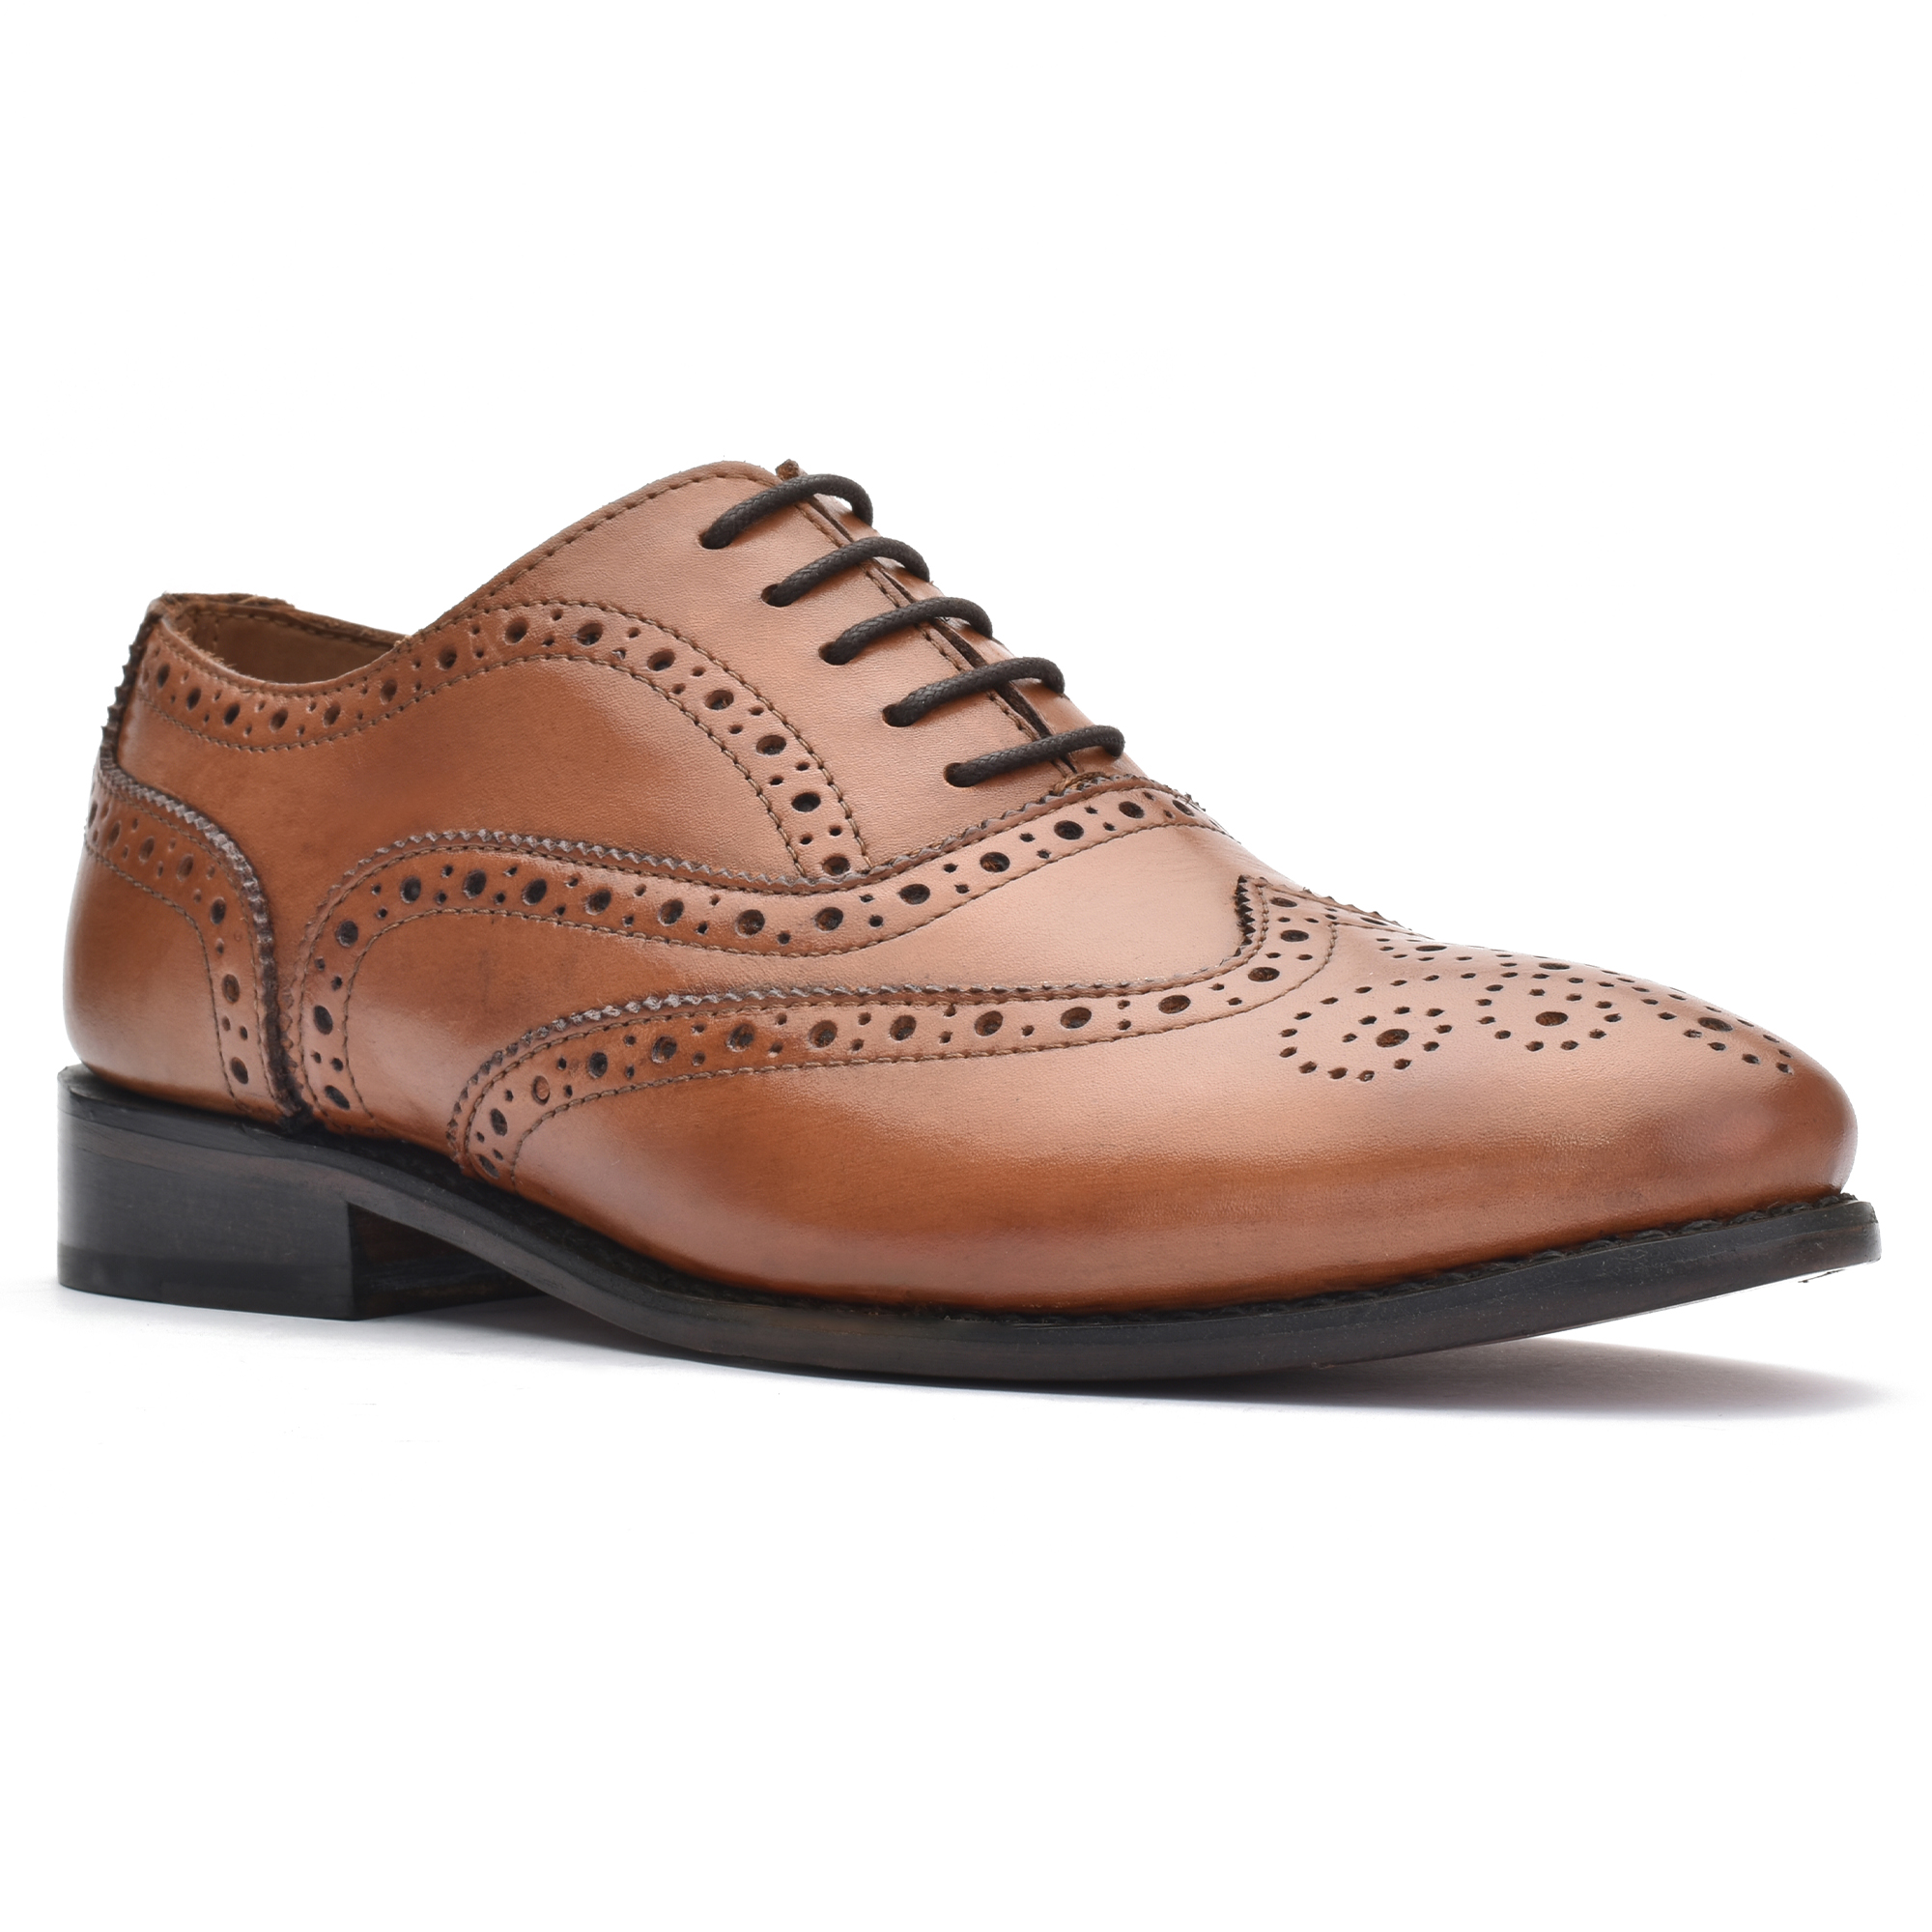 Gents Brown Oxford Brogue (873/873B) Full soft leather upper and ...